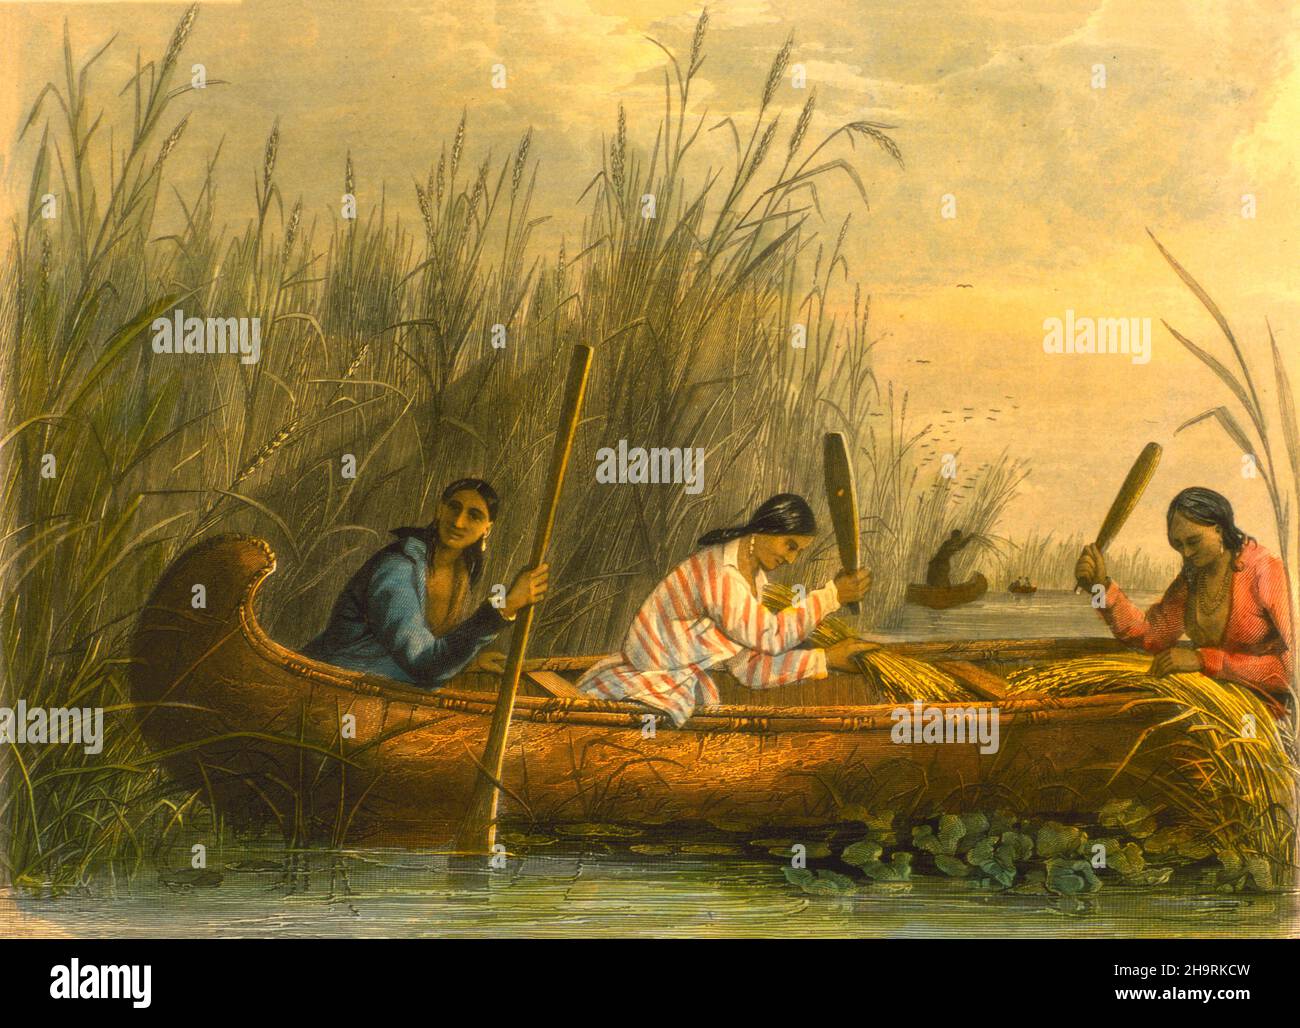 Native American women of the Ojibwa tribe, in a canoe, Gathering wild rice by Seth Eastman, 1808-1875 in 1853. Three Native American women (Chippewa?) in a birch bark canoe gather seeds from wild rice. They use paddles to beat out the seeds. Stock Photo